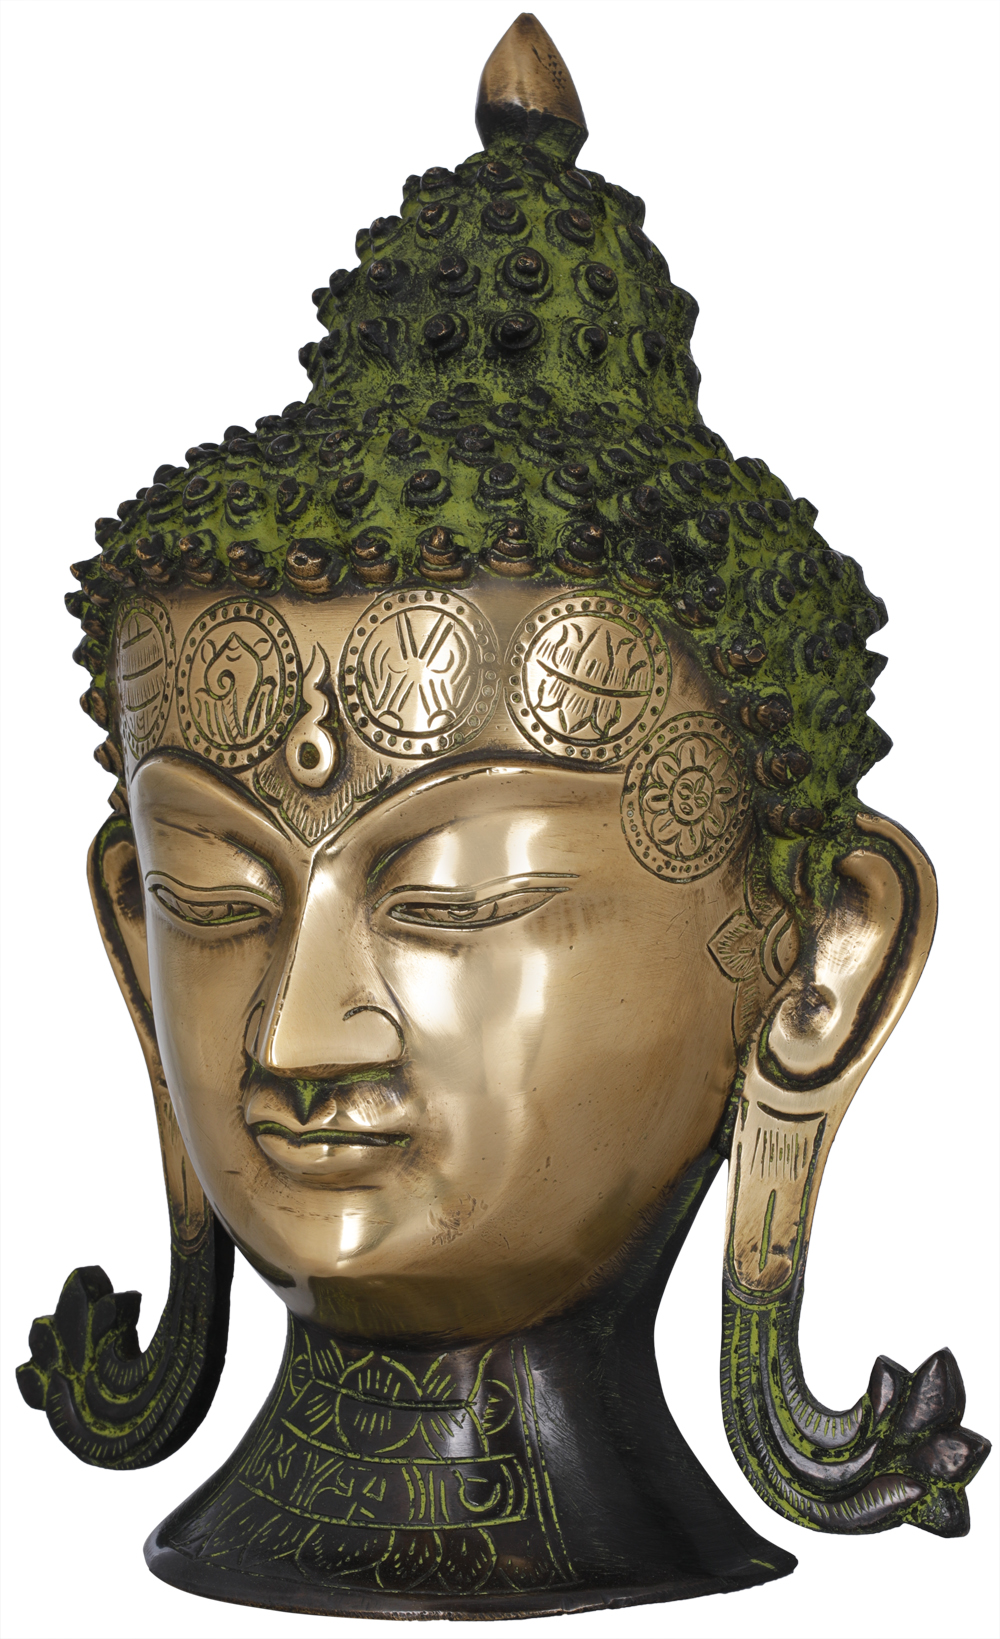 Details about   Buddha Wall Hanging Mask Art Antique Finish Brass Tibet Decor Removable 6" 